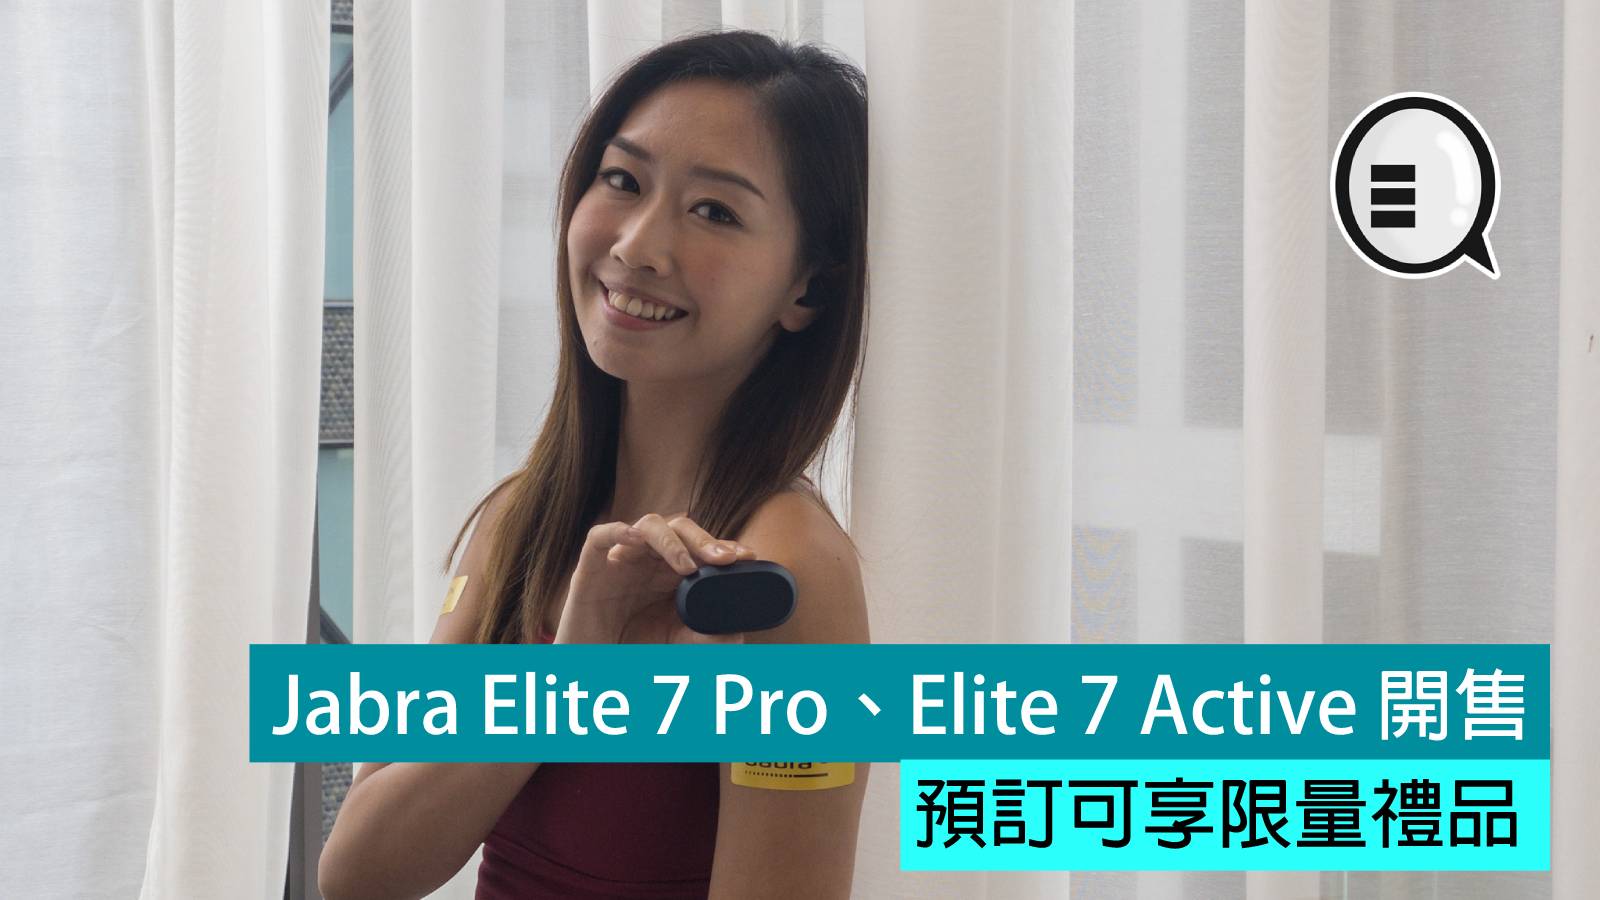 Jabra Elite 7 Pro, Elite 7 Active are on sale, you can enjoy limited gifts when you book thumbnail